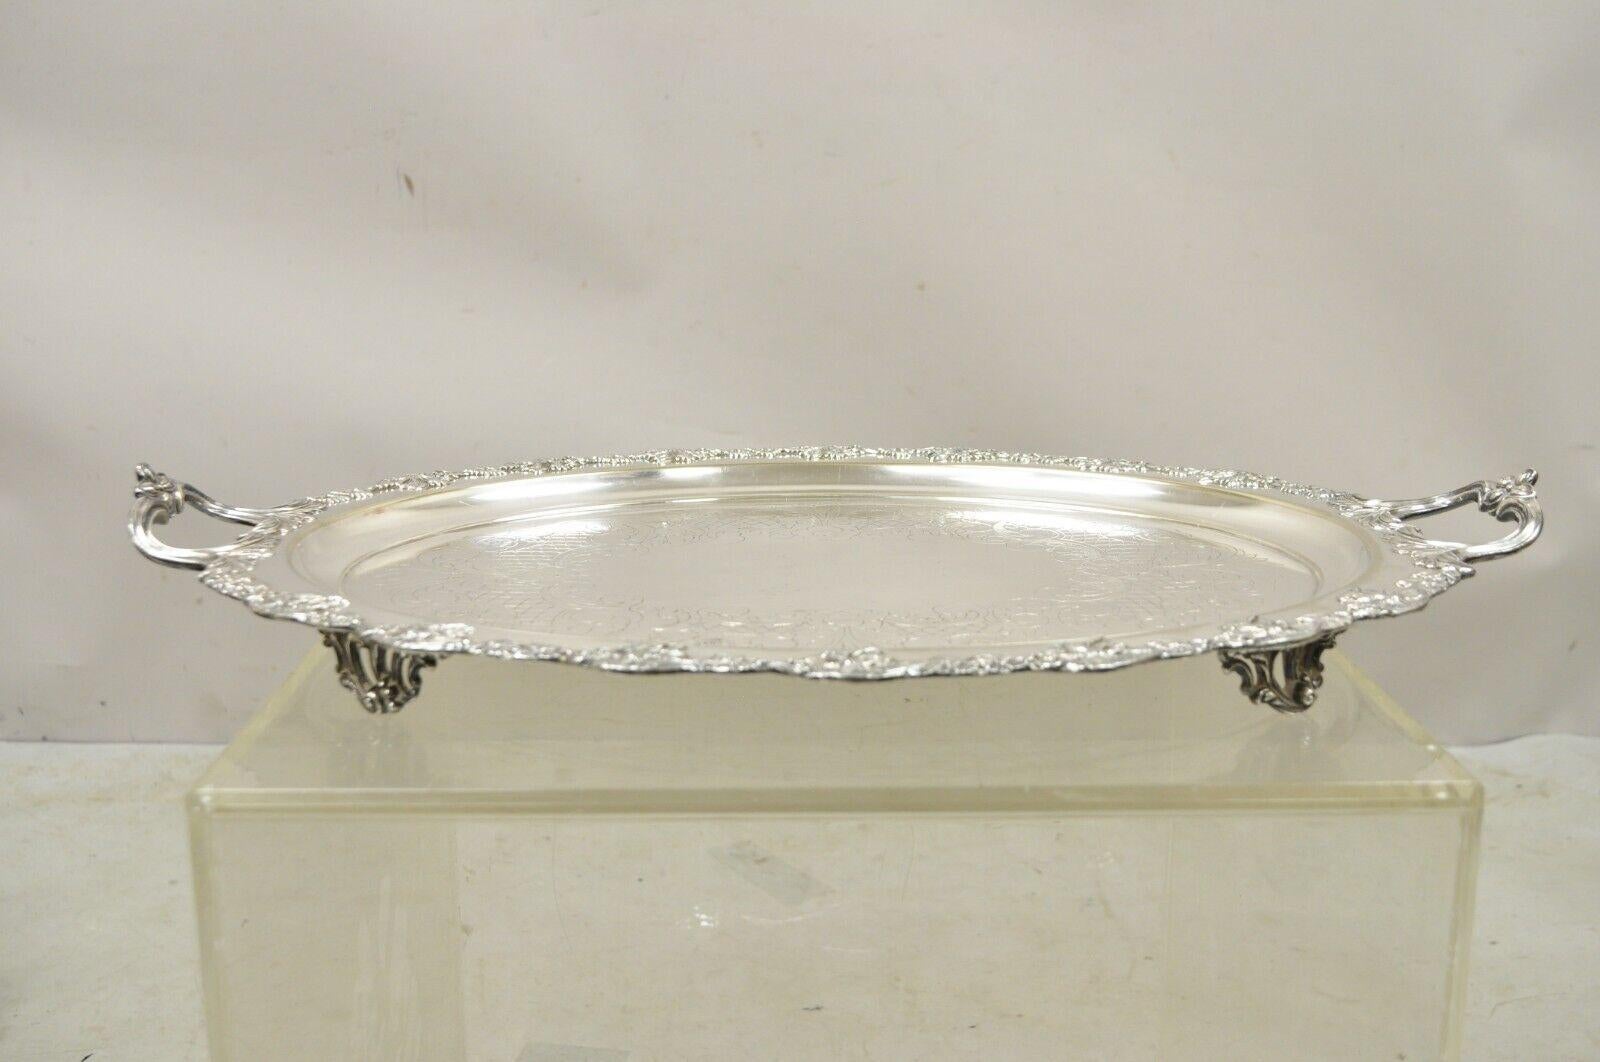 Vintage English Sheffield Silver Plated Oval Maple Leaf Serving Platter Tray. Item features ornate Twin Handles, Etched Center, Maple Leaf Gallery, Original Hallmark, Raised on Ornate Feet. Circa Mid 20th Century. Measurements:  2